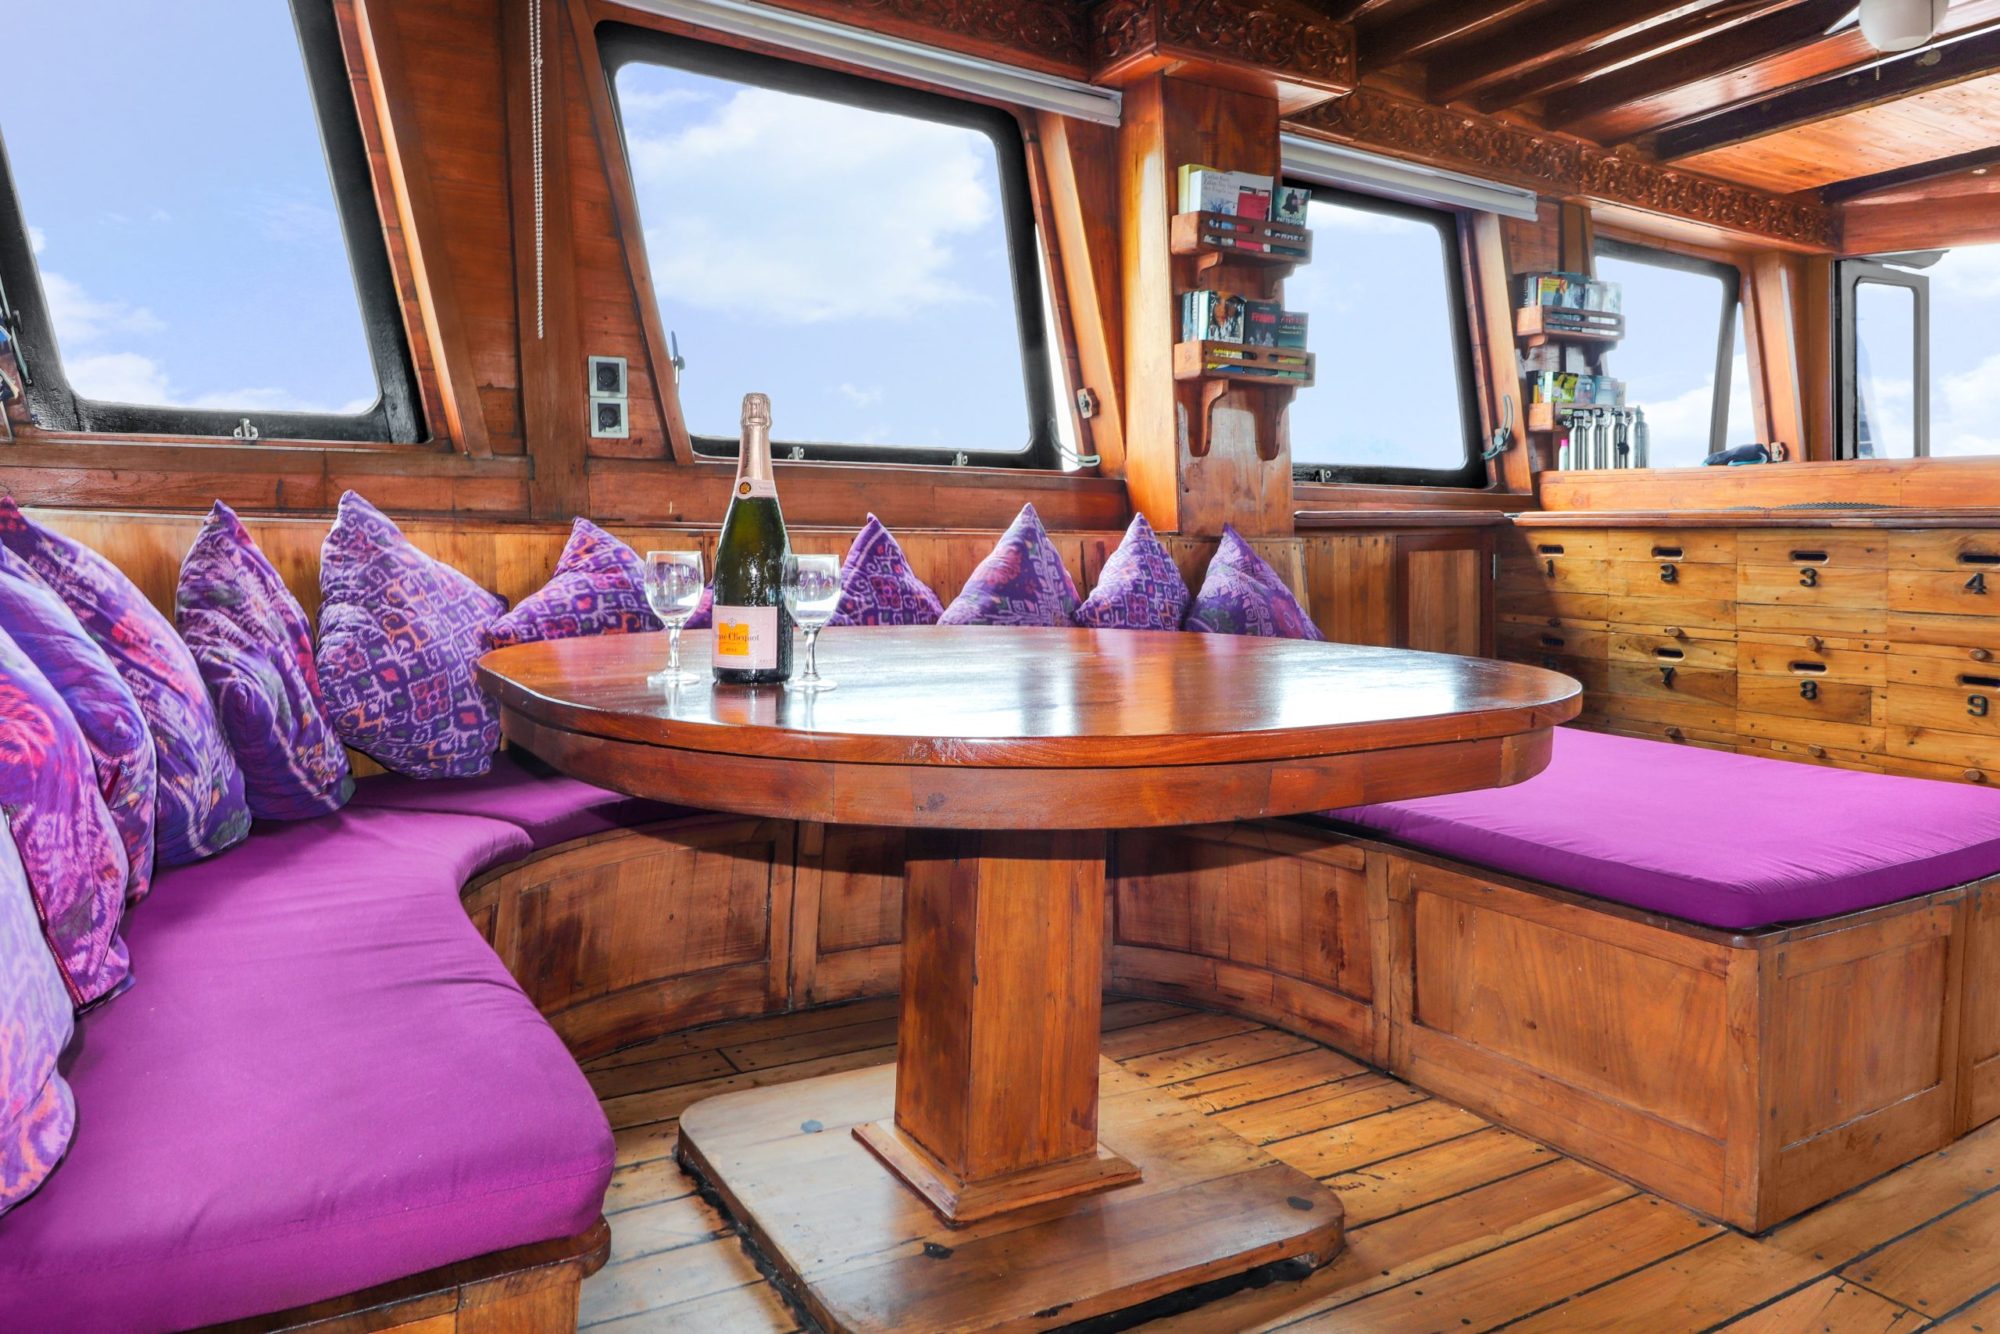 Ilike liveaboard review: Diving from Raja Ampat to Kaimana, Indonesia